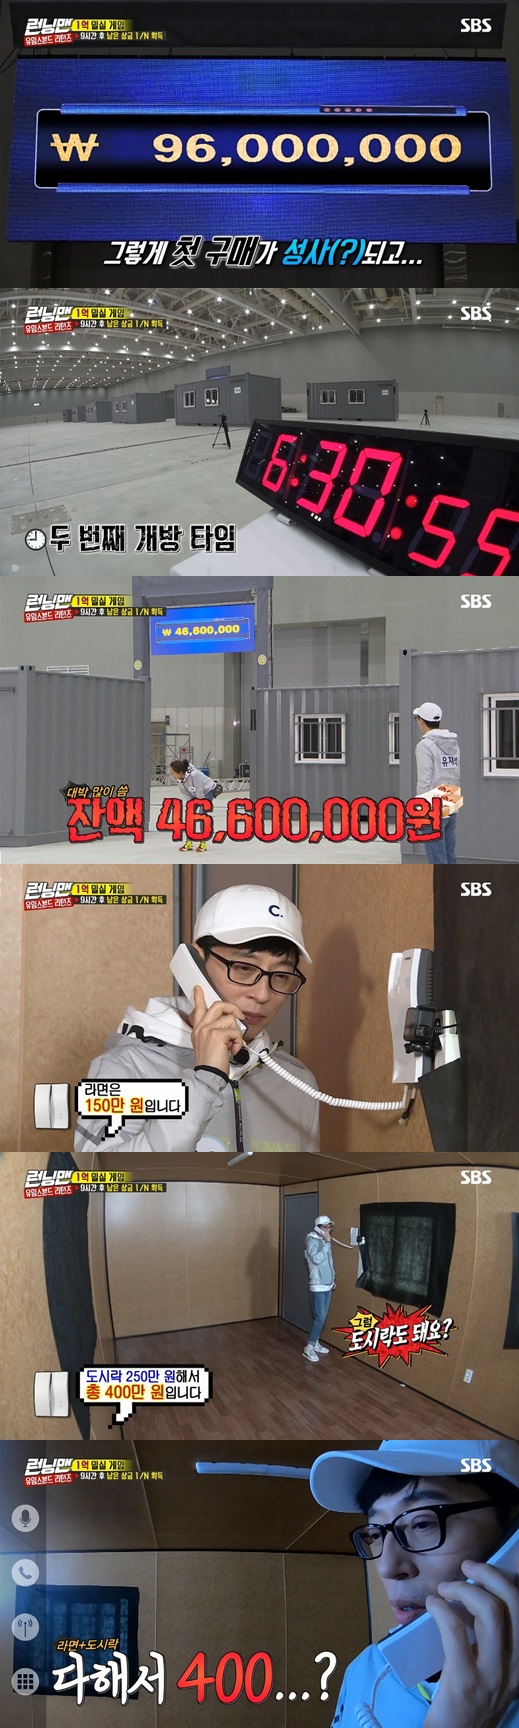 SBS Running Man, which was surrounded by the controversy over plagiarism of the program concept, apologized for the similarity.SBS said on the afternoon of the 29th, It was raised that the first part of the SBS Running Man - Returning Uims Bond-1bn One Man, which was broadcast on the 28th, is similar to the composition of Naver Webtoon Money Game.Running Man was transformed by referring to Bae Jin-soos Money Game. The production team, who is also a fan of Bae Jin-soo, made a race by referring to the concept of Money Game .I sincerely apologize for not contacting Naver Webtoon and Bae Jin-soo in advance. Running Man, which aired on the 28th, was featured on Bond (Yoo Jae-Suk), which was returned, and it was a pleasure for fans.The members held nine hours in each container and then went on a game in which they could win the remaining prize money if they saved 100 million One given to everyone as much as possible. It was pointed out that this composition resembles Money Game .Participants live in a limited space, can purchase goods only through interphones, and prices in containers that are more expensive than real prices are raised as similar points.Bae Jin-soo, who painted Webtoon, was also reported to have expressed embarrassment that he did not receive any contact from SBS in advance, and Naver Webtoon was reported to have announced legal action.